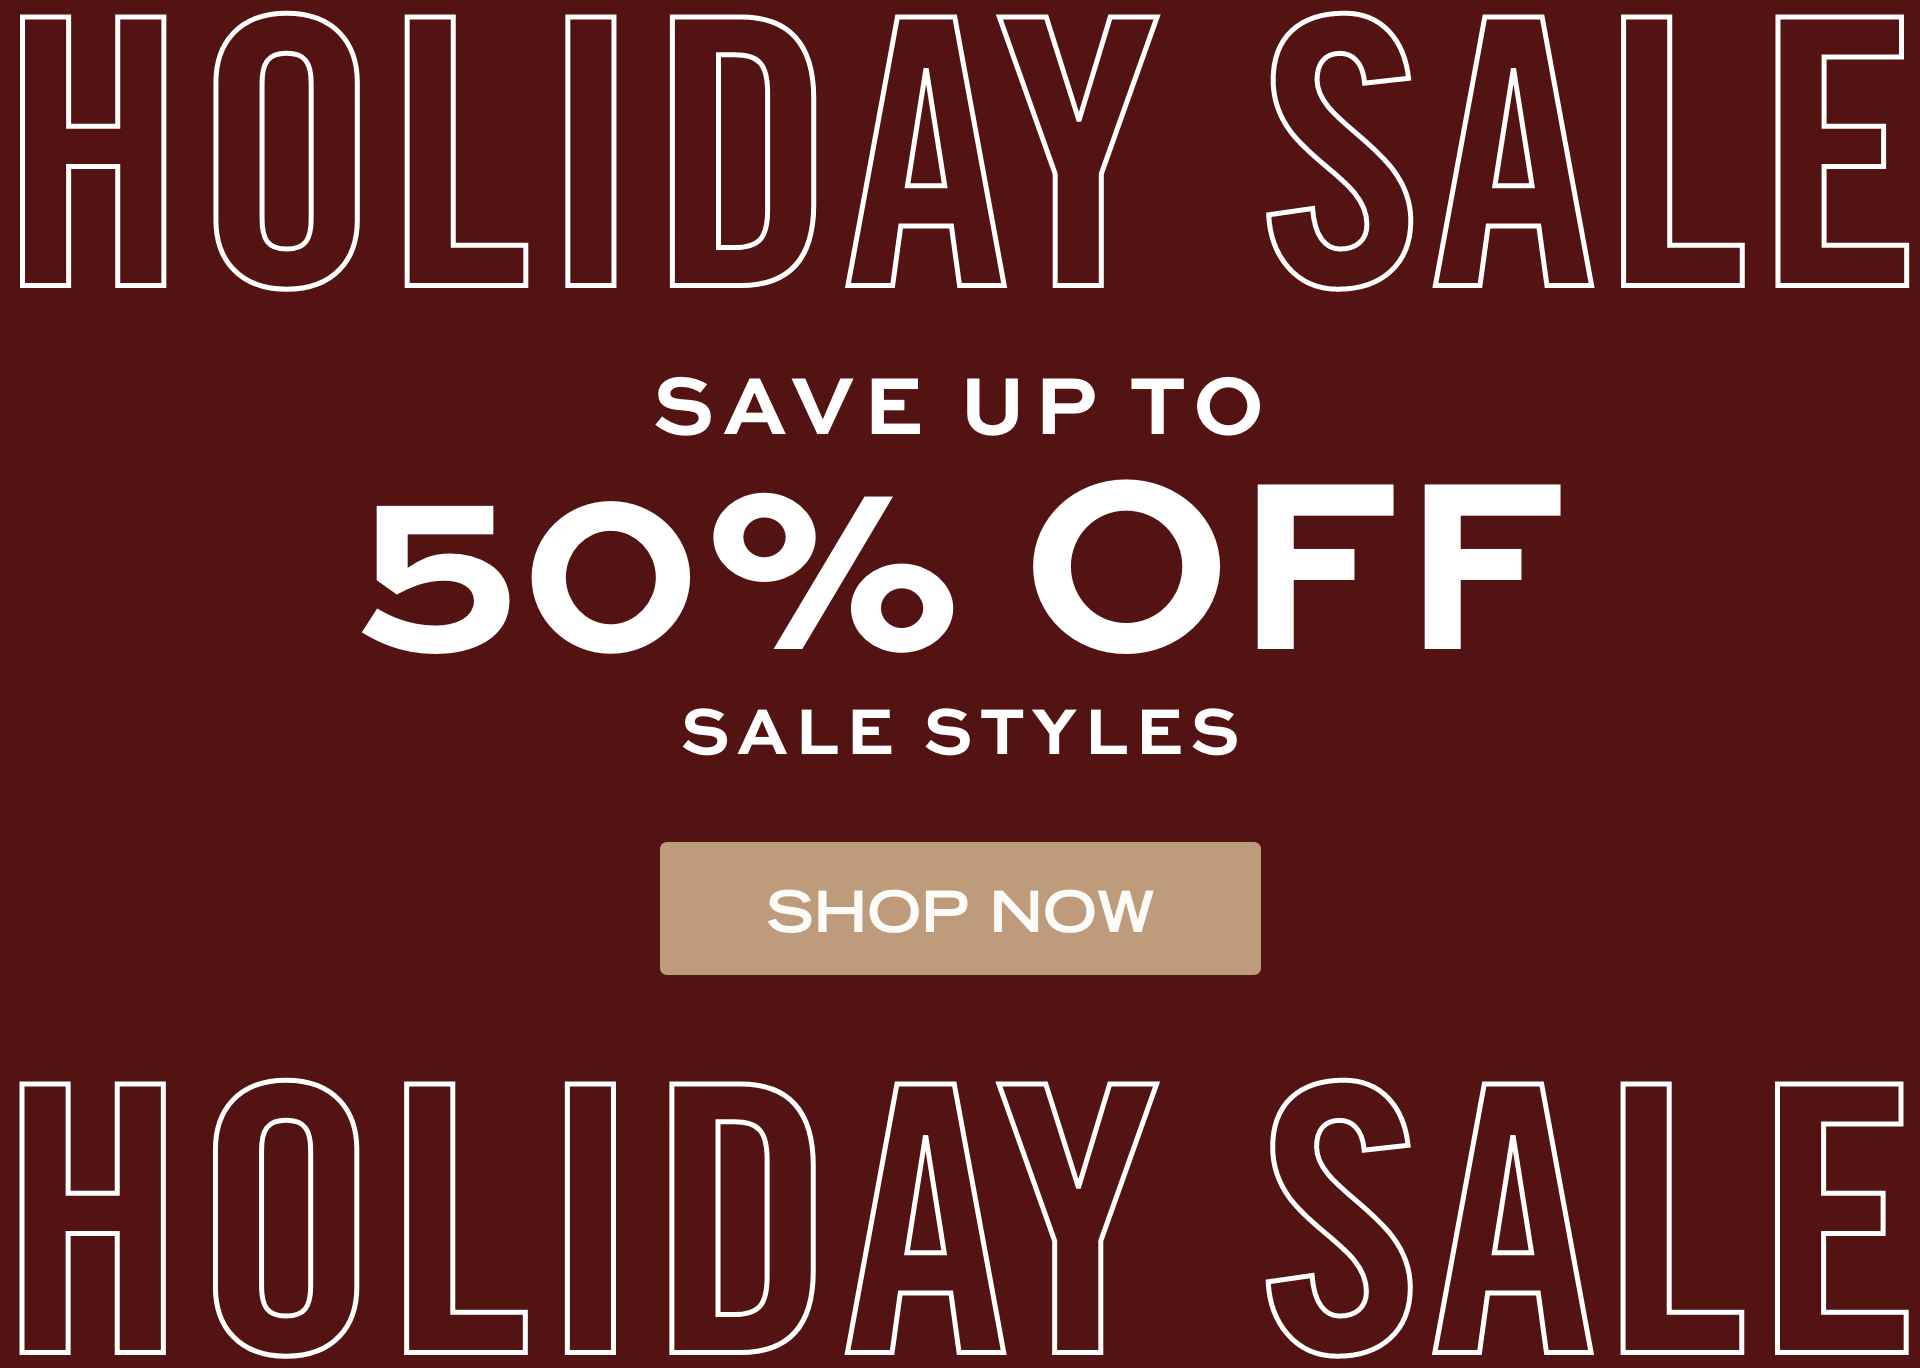 Save Up to 50% Off Sale Styles